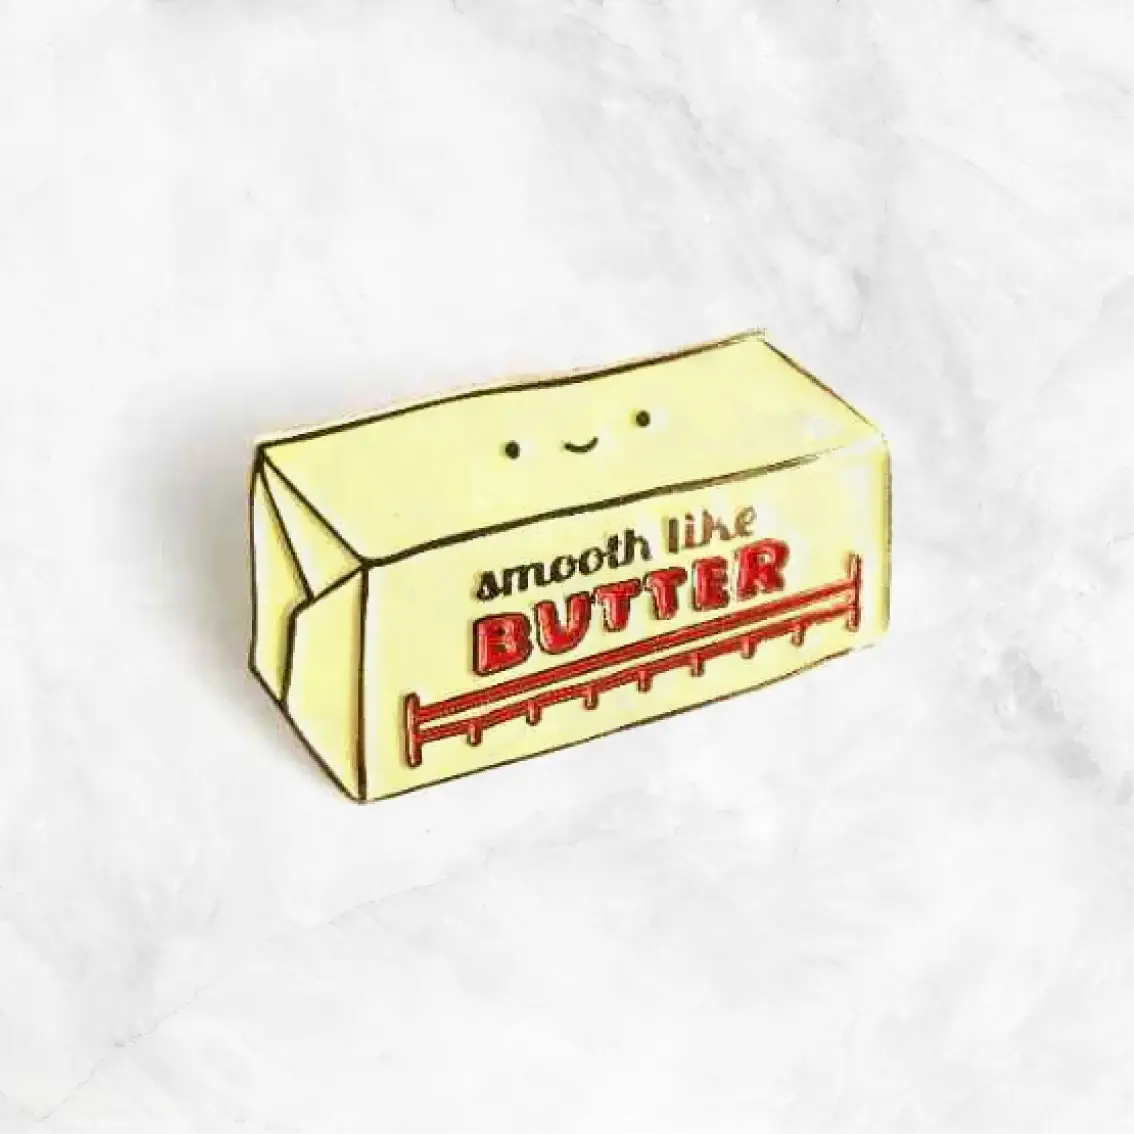 Smooth like Butter Enamel Lapel Pin Delivery